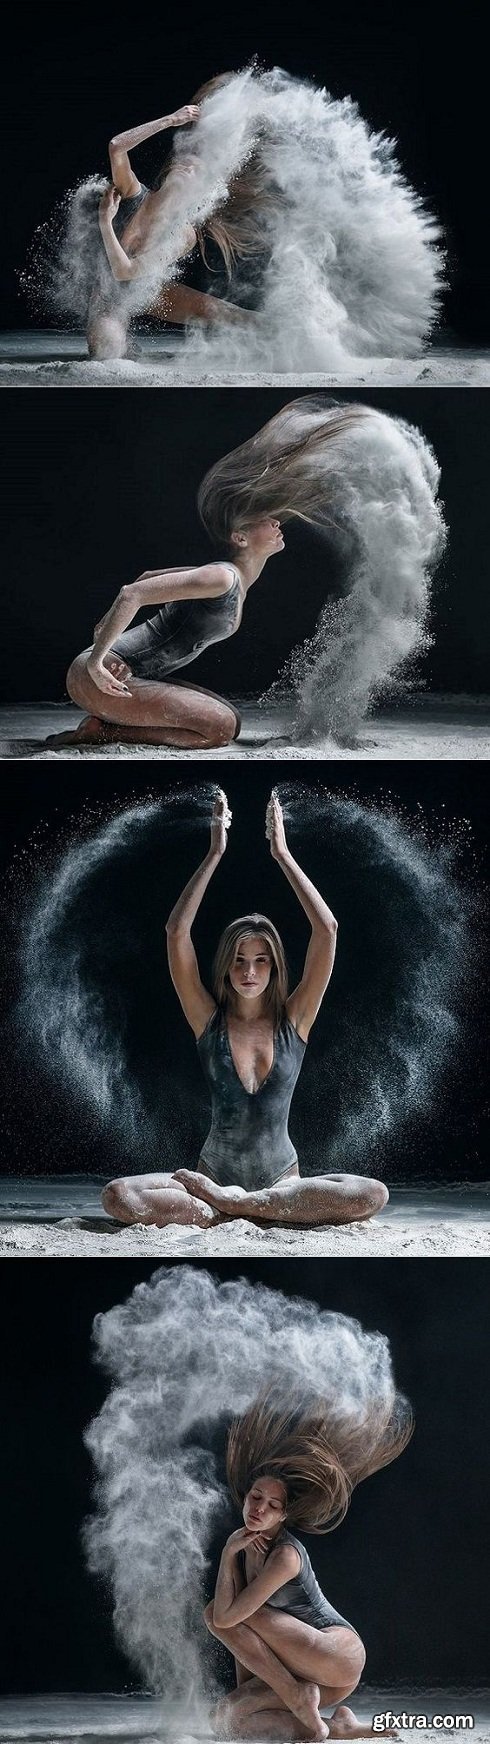 Lighting with Flash: Capturing a Dancer in Motion